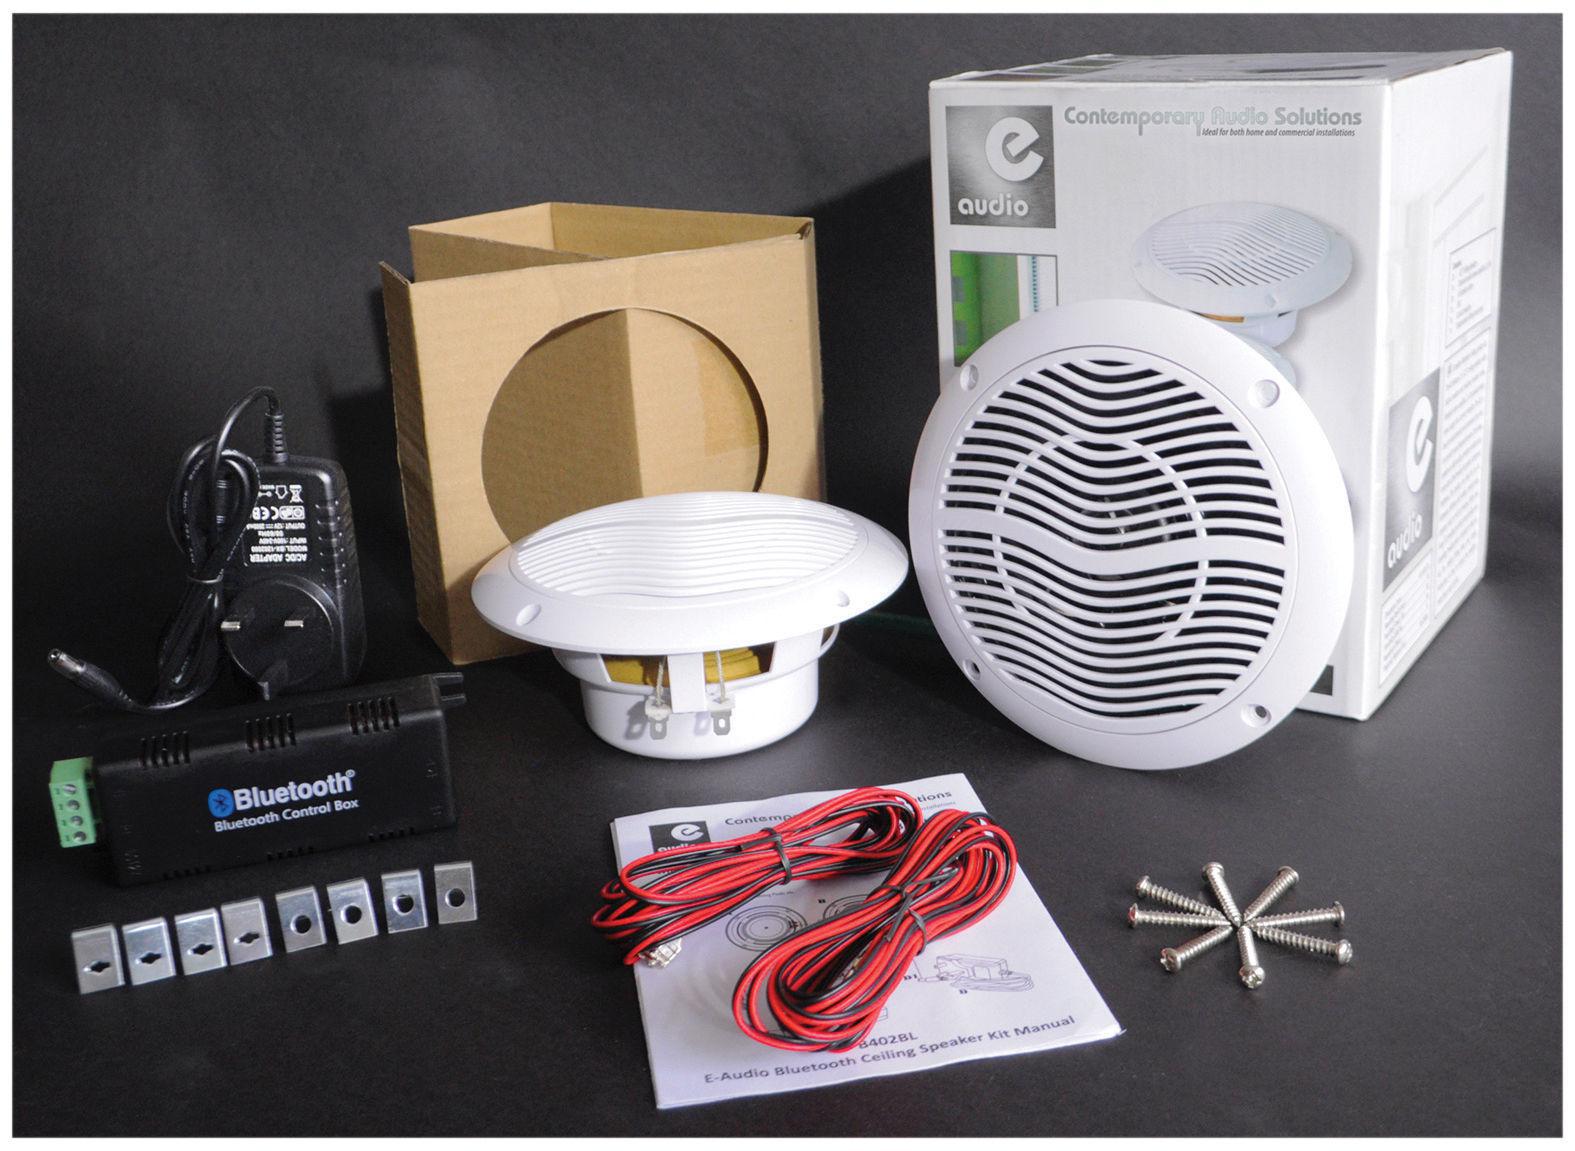 E Audio 2 X 5 25 Bluetooth Ceiling Speaker Kit With Cable Amp